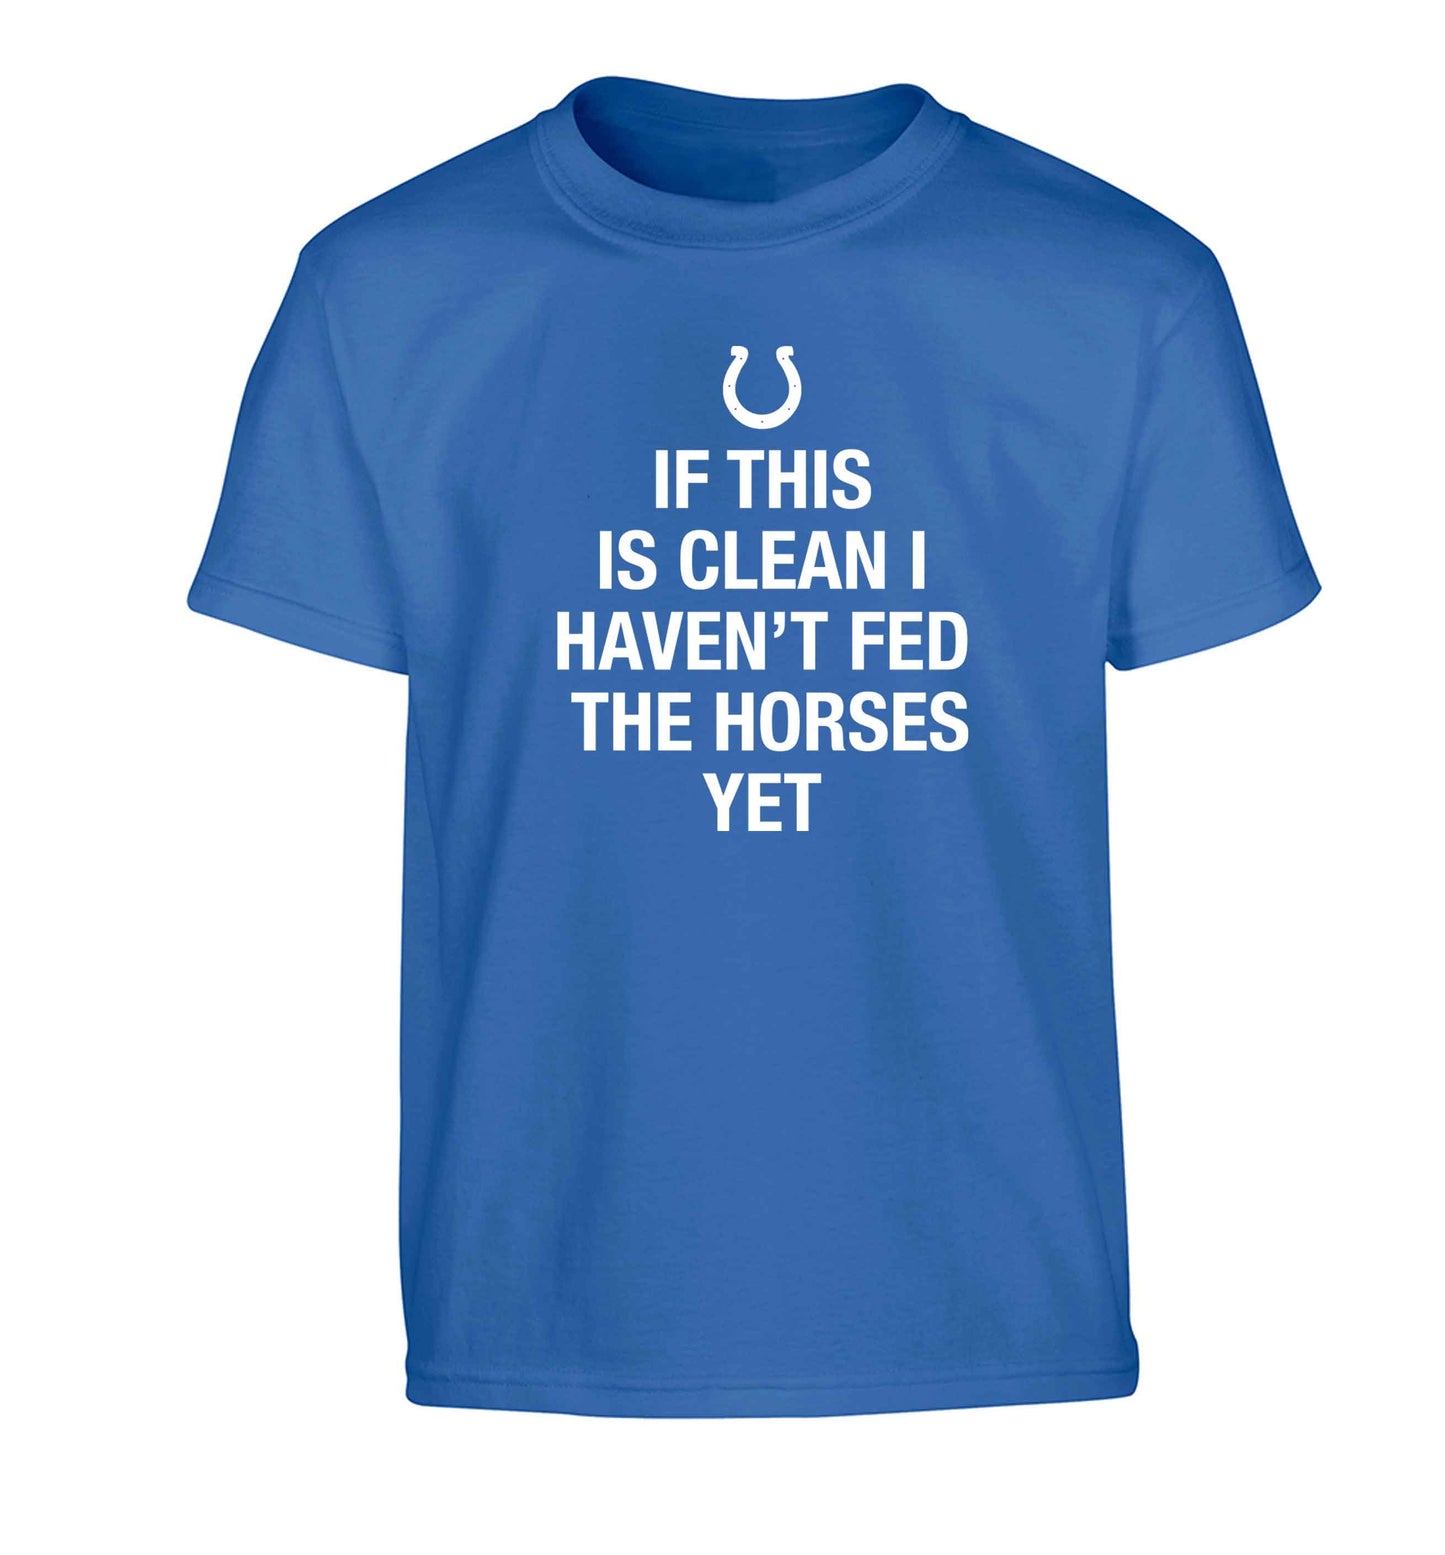 If this isn't clean I haven't fed the horses yet Children's blue Tshirt 12-13 Years